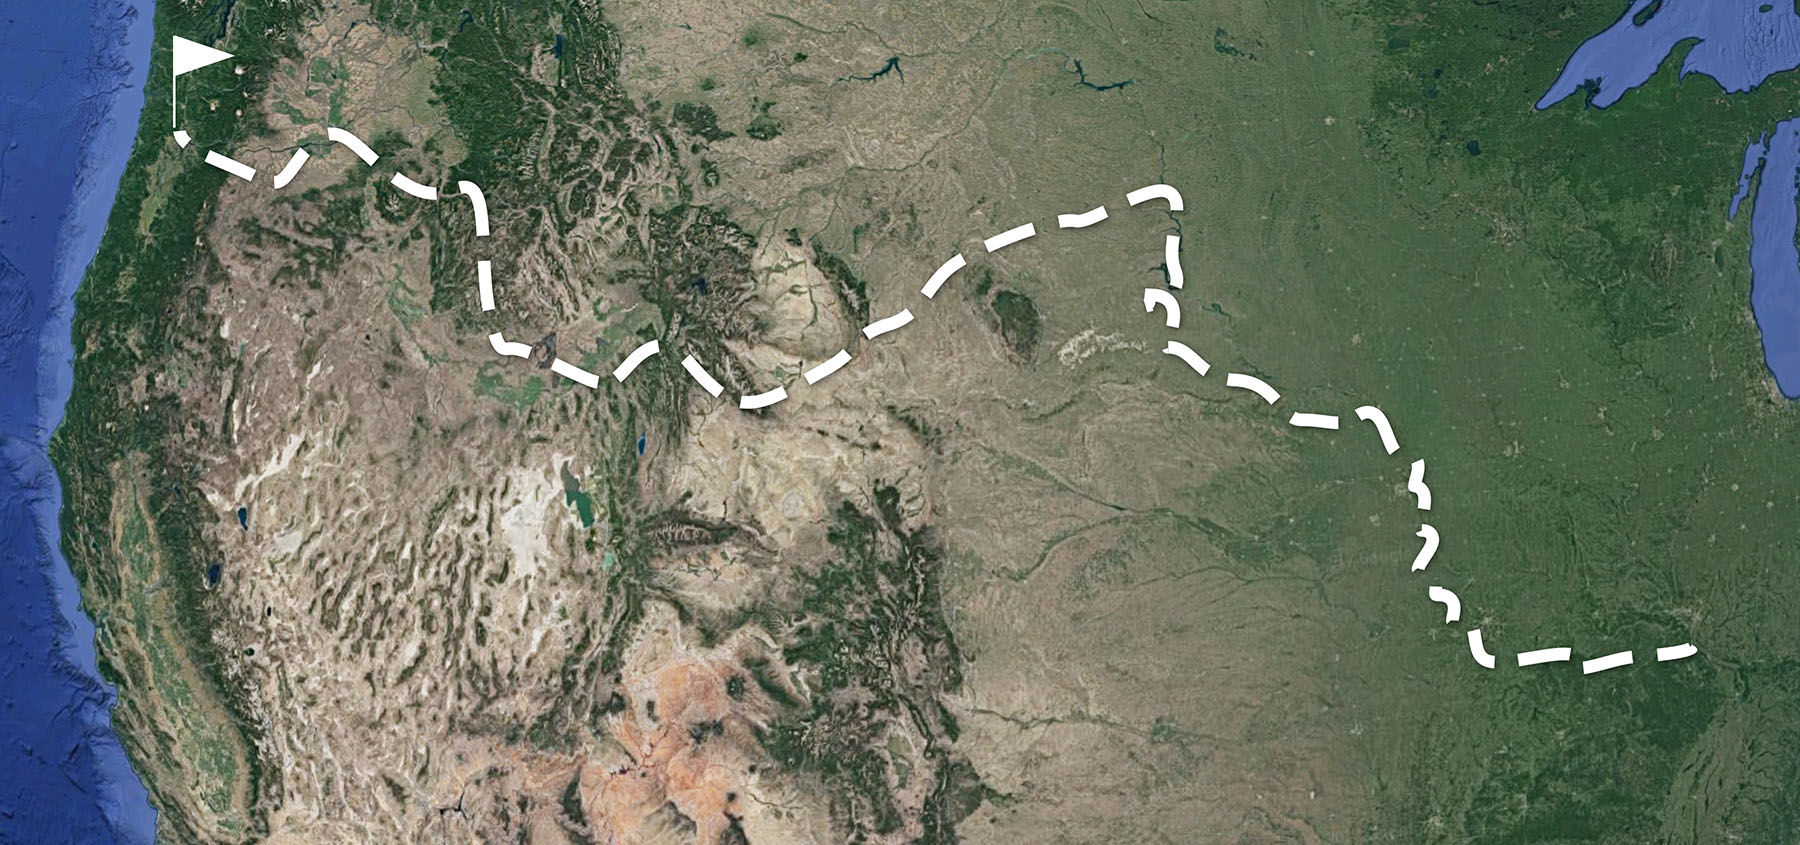 Astor Overland Party route